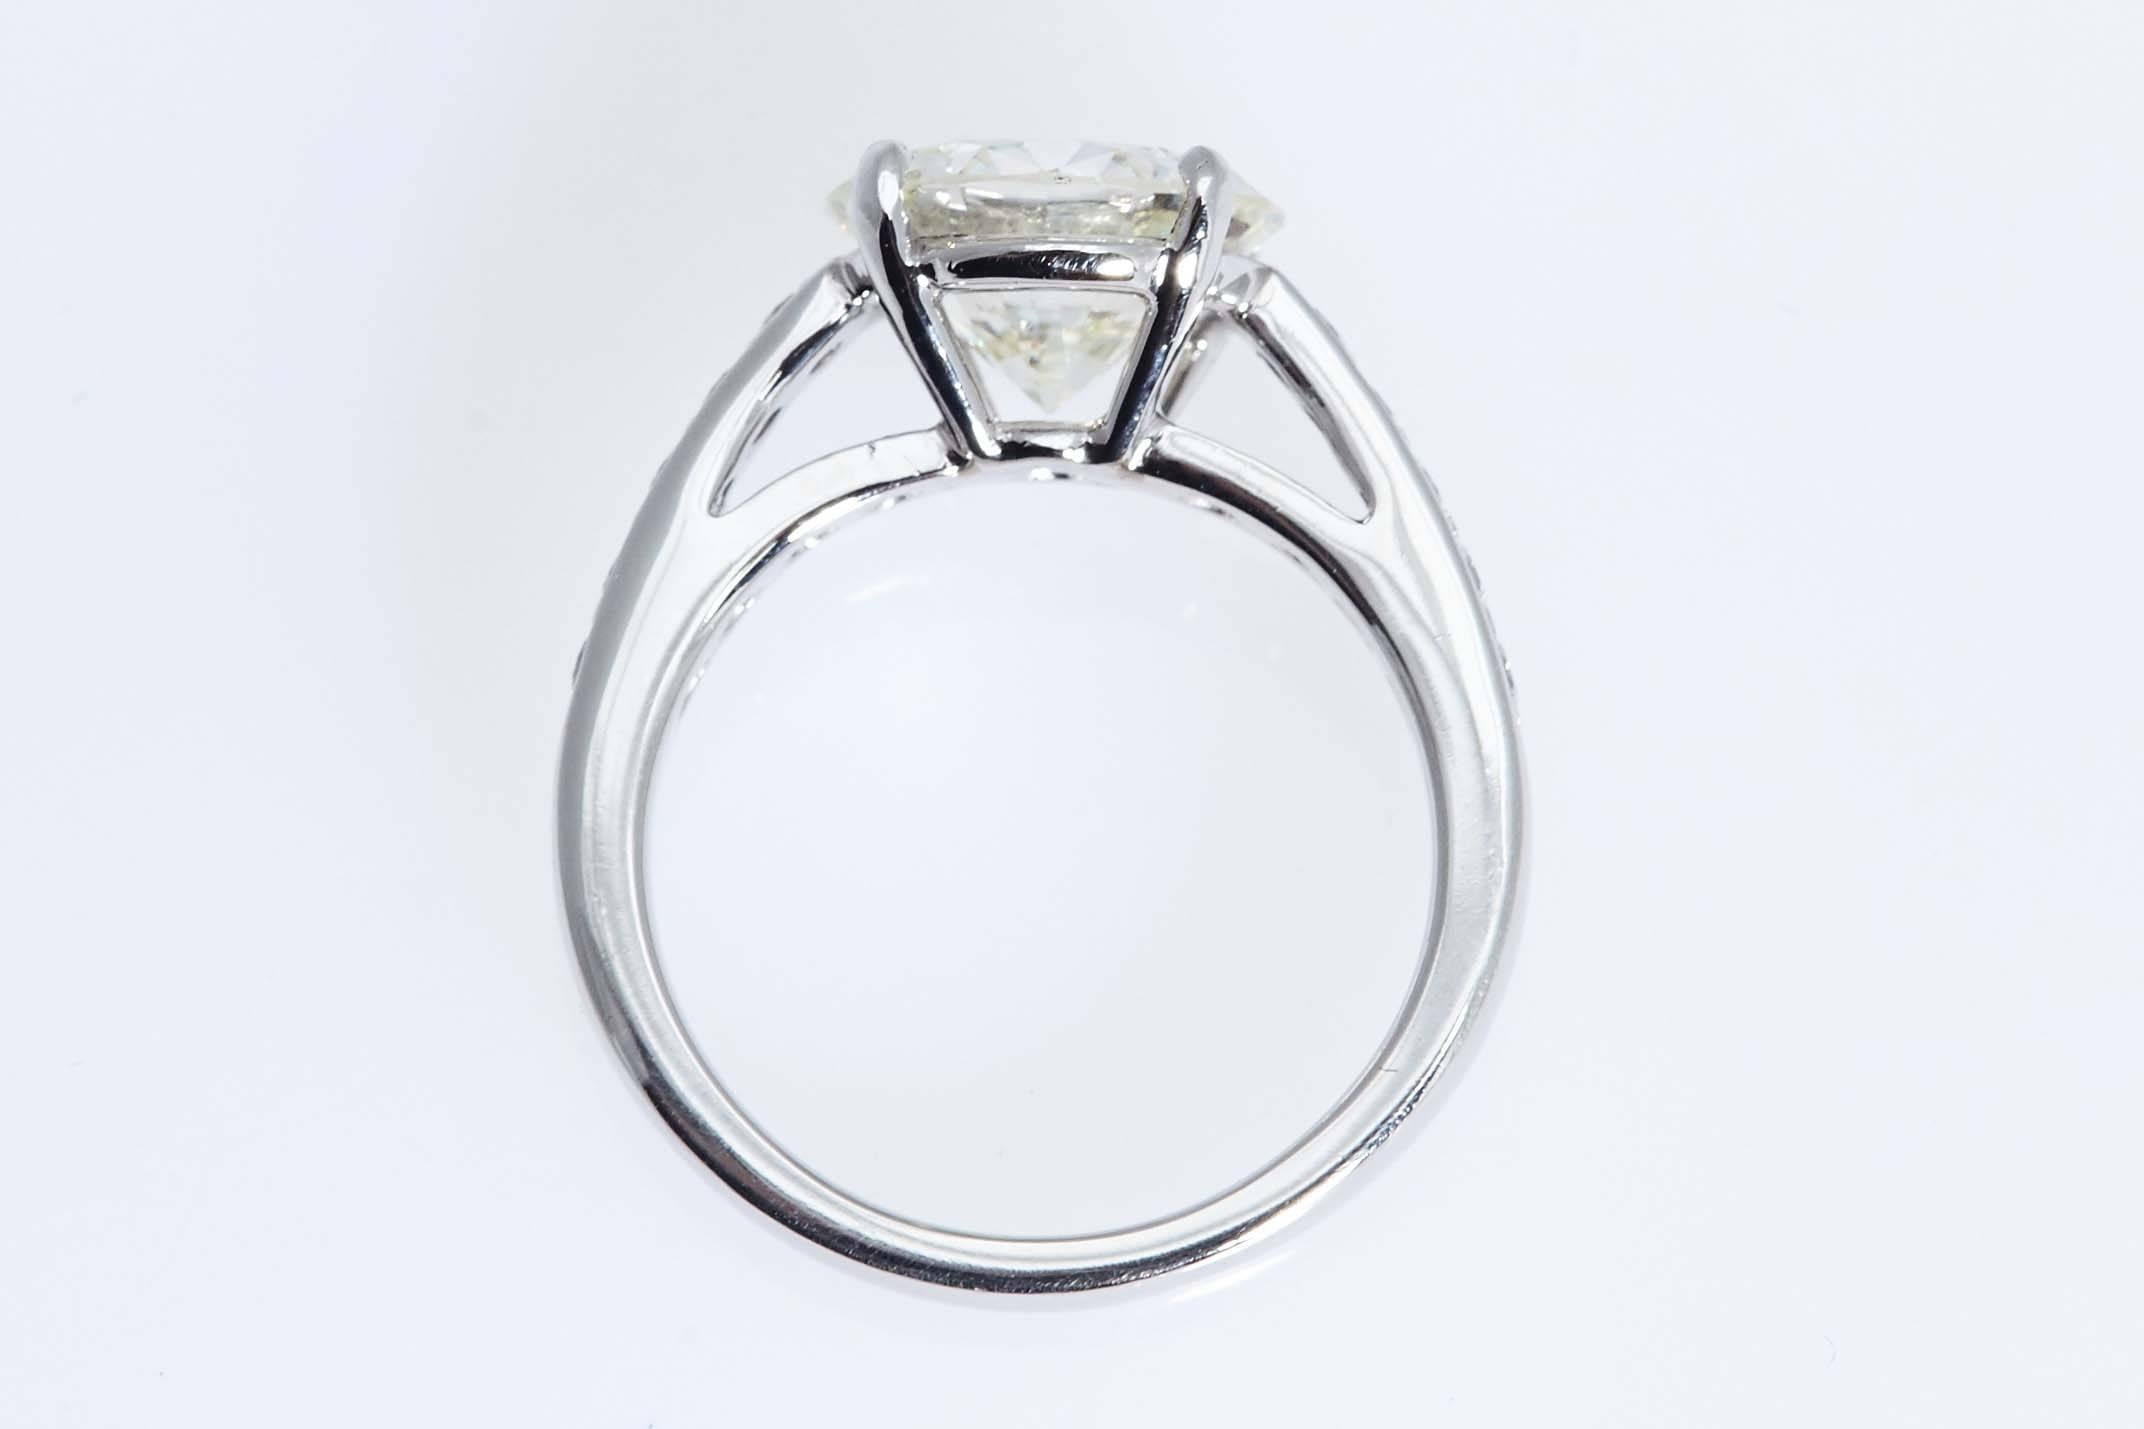 Platinum engagement ring with a diamond weighing 3.01 carats. The center diamond has a certificate from the Gemological Institute of America stating that it is "I" in color and "VS2" in clarity.  The platinum ring has 10 smaller